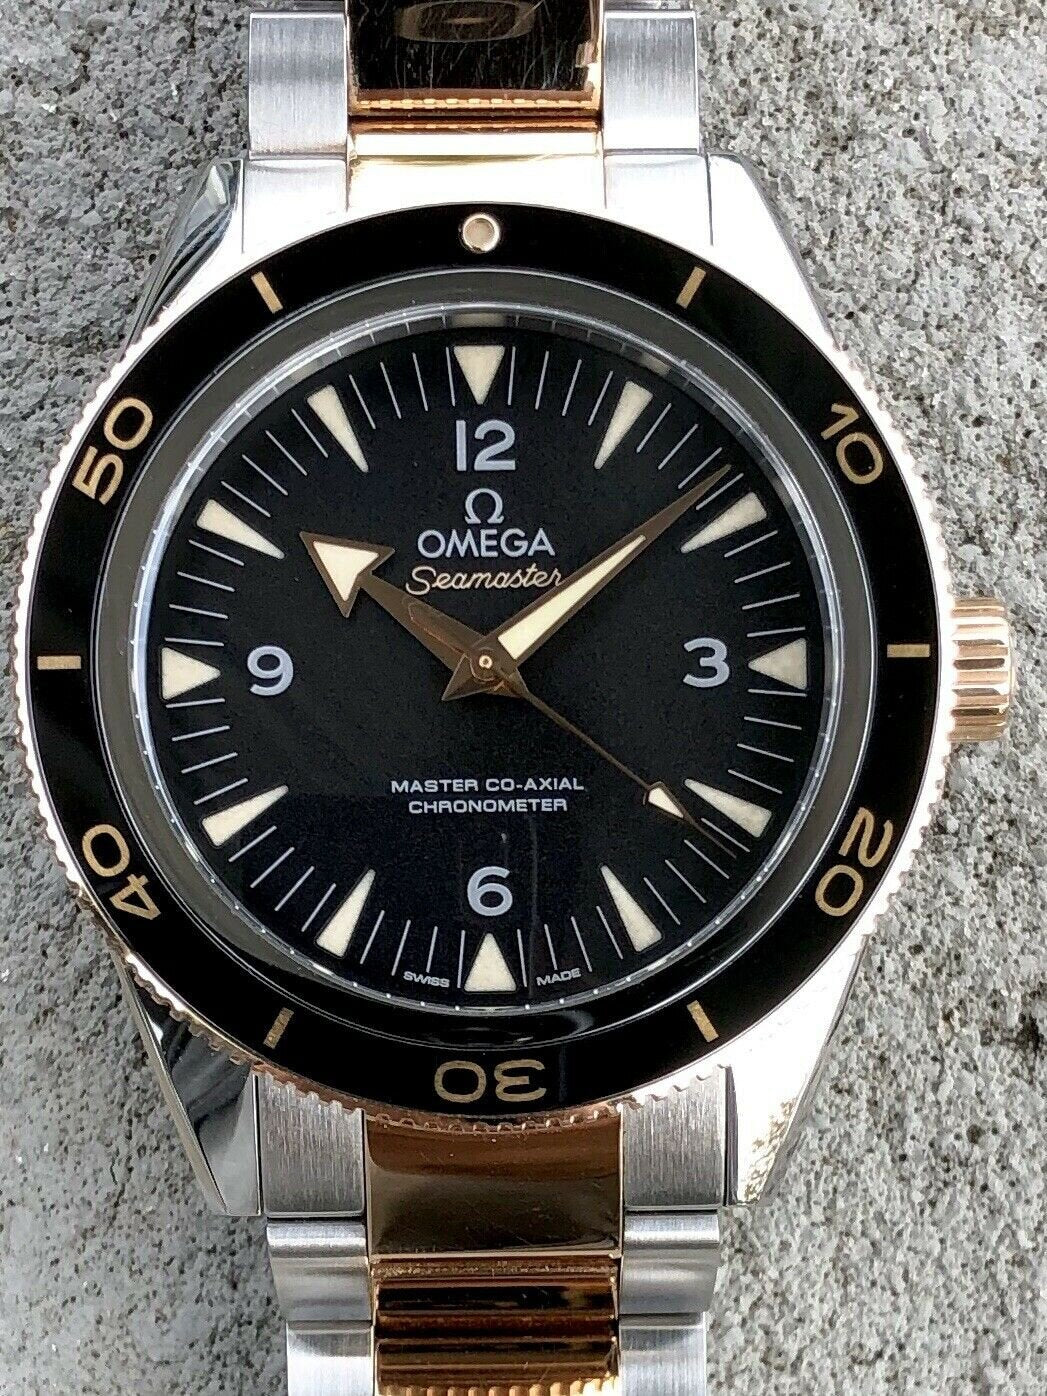 Omega_Seamaster_300_Co_E2_80_91Axial_41mm_Sedna_Gold_Two-Tone_233.20.41.21.01.001_-_2016_Watch_Vault_01.jpg